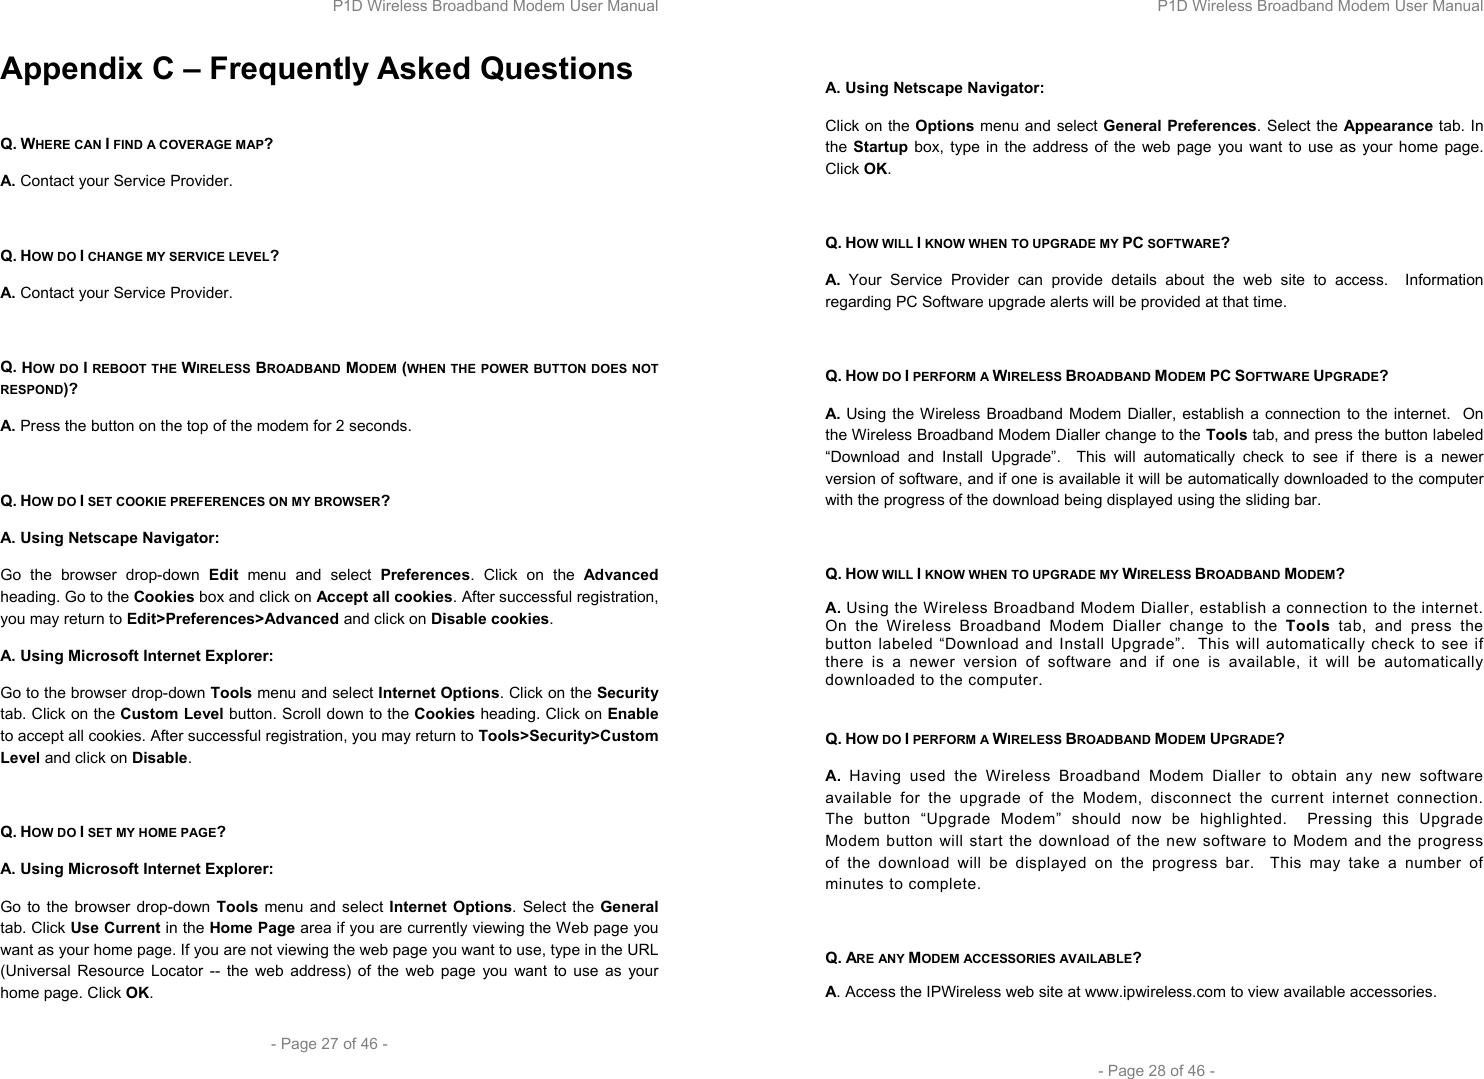 P1D Wireless Broadband Modem User Manual  - Page 27 of 46 -  Appendix C – Frequently Asked Questions  Q. WHERE CAN I FIND A COVERAGE MAP? A. Contact your Service Provider.  Q. HOW DO I CHANGE MY SERVICE LEVEL? A. Contact your Service Provider.  Q. HOW DO I REBOOT THE WIRELESS BROADBAND MODEM (WHEN THE POWER BUTTON DOES NOT RESPOND)? A. Press the button on the top of the modem for 2 seconds.  Q. HOW DO I SET COOKIE PREFERENCES ON MY BROWSER? A. Using Netscape Navigator: Go the browser drop-down Edit menu and select Preferences. Click on the Advanced heading. Go to the Cookies box and click on Accept all cookies. After successful registration, you may return to Edit&gt;Preferences&gt;Advanced and click on Disable cookies. A. Using Microsoft Internet Explorer: Go to the browser drop-down Tools menu and select Internet Options. Click on the Security tab. Click on the Custom Level button. Scroll down to the Cookies heading. Click on Enable to accept all cookies. After successful registration, you may return to Tools&gt;Security&gt;Custom Level and click on Disable.  Q. HOW DO I SET MY HOME PAGE? A. Using Microsoft Internet Explorer: Go to the browser drop-down Tools menu and select Internet Options. Select the General tab. Click Use Current in the Home Page area if you are currently viewing the Web page you want as your home page. If you are not viewing the web page you want to use, type in the URL (Universal Resource Locator -- the web address) of the web page you want to use as your home page. Click OK. P1D Wireless Broadband Modem User Manual  - Page 28 of 46 -  A. Using Netscape Navigator: Click on the Options menu and select General Preferences. Select the Appearance tab. In the Startup box, type in the address of the web page you want to use as your home page. Click OK.  Q. HOW WILL I KNOW WHEN TO UPGRADE MY PC SOFTWARE? A. Your Service Provider can provide details about the web site to access.  Information regarding PC Software upgrade alerts will be provided at that time.  Q. HOW DO I PERFORM A WIRELESS BROADBAND MODEM PC SOFTWARE UPGRADE? A. Using the Wireless Broadband Modem Dialler, establish a connection to the internet.  On the Wireless Broadband Modem Dialler change to the Tools tab, and press the button labeled “Download and Install Upgrade”.  This will automatically check to see if there is a newer version of software, and if one is available it will be automatically downloaded to the computer with the progress of the download being displayed using the sliding bar.  Q. HOW WILL I KNOW WHEN TO UPGRADE MY WIRELESS BROADBAND MODEM? A. Using the Wireless Broadband Modem Dialler, establish a connection to the internet.  On the Wireless Broadband Modem Dialler change to the Tools tab, and press the button labeled “Download and Install Upgrade”.  This will automatically check to see if there is a newer version of software and if one is available, it will be automatically downloaded to the computer.  Q. HOW DO I PERFORM A WIRELESS BROADBAND MODEM UPGRADE? A. Having used the Wireless Broadband Modem Dialler to obtain any new software available for the upgrade of the Modem, disconnect the current internet connection.  The button “Upgrade Modem” should now be highlighted.  Pressing this Upgrade Modem button will start the download of the new software to Modem and the progress of the download will be displayed on the progress bar.  This may take a number of minutes to complete.  Q. ARE ANY MODEM ACCESSORIES AVAILABLE? A. Access the IPWireless web site at www.ipwireless.com to view available accessories.  